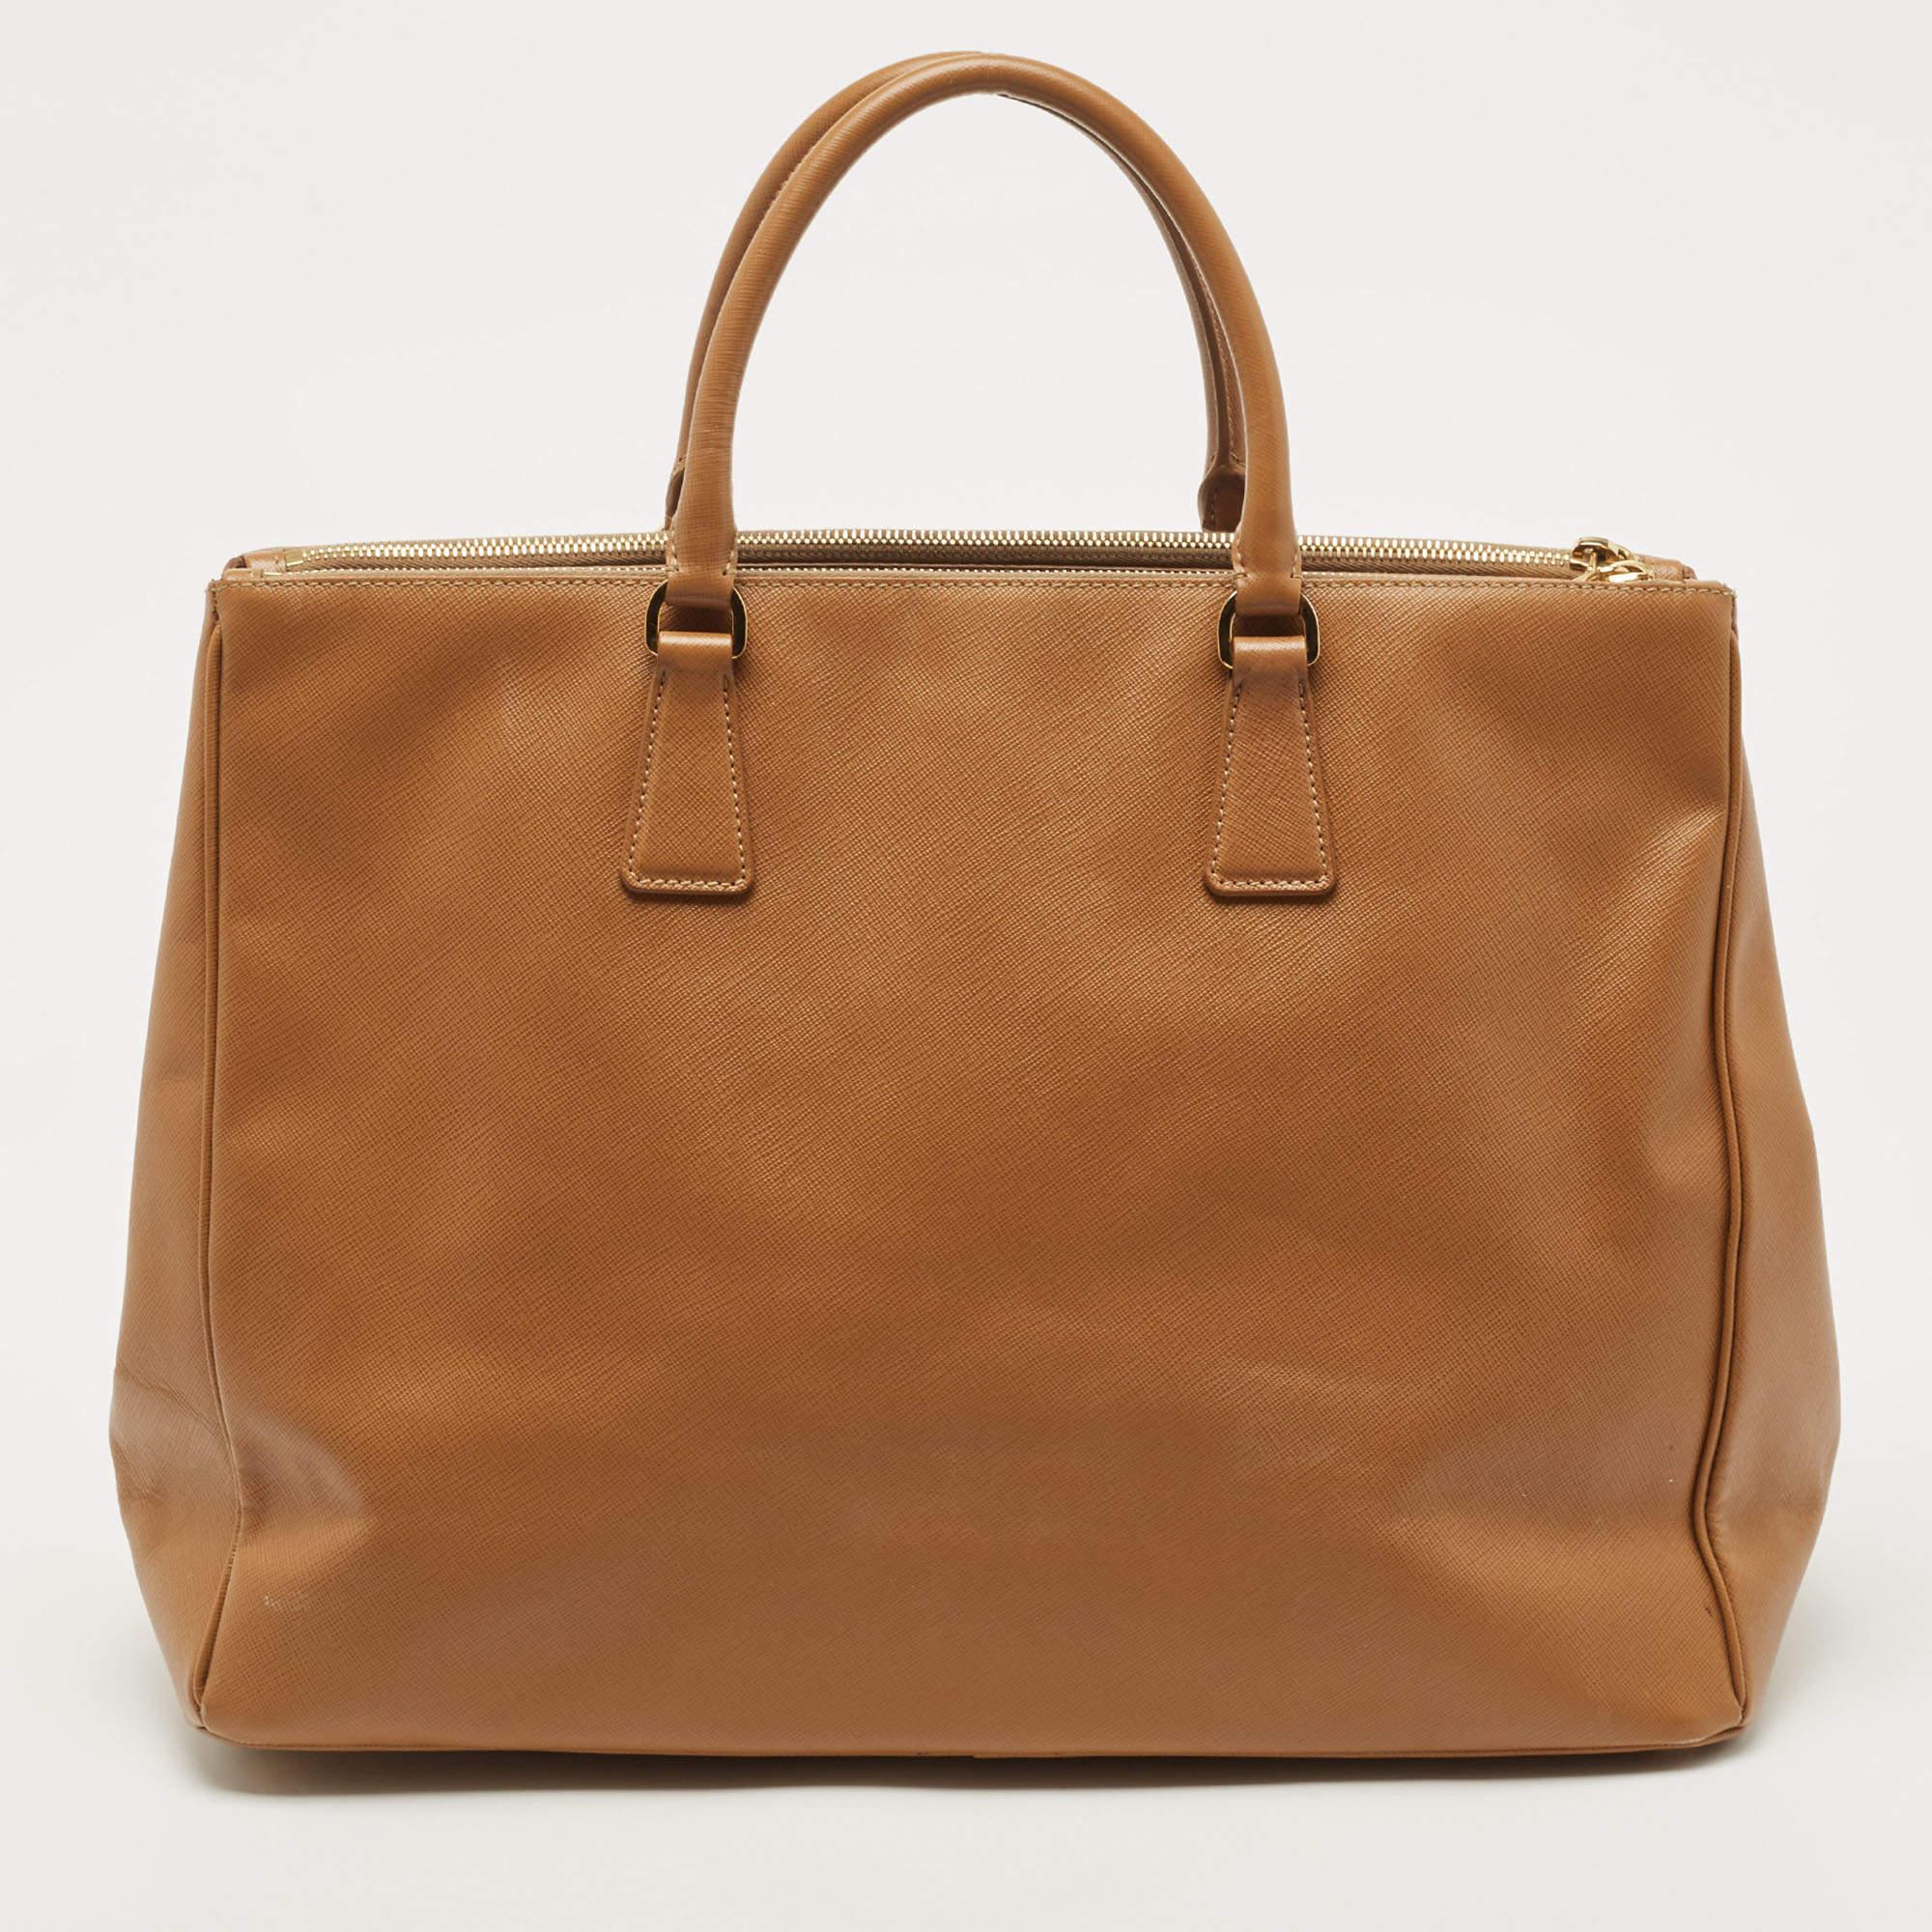 Feminine in shape and grand on design, this Double Zip tote by Prada will be a loved addition to your closet. It has been crafted from Saffiano lux leather and styled minimally with gold-tone hardware. It comes with two top handles, two zip